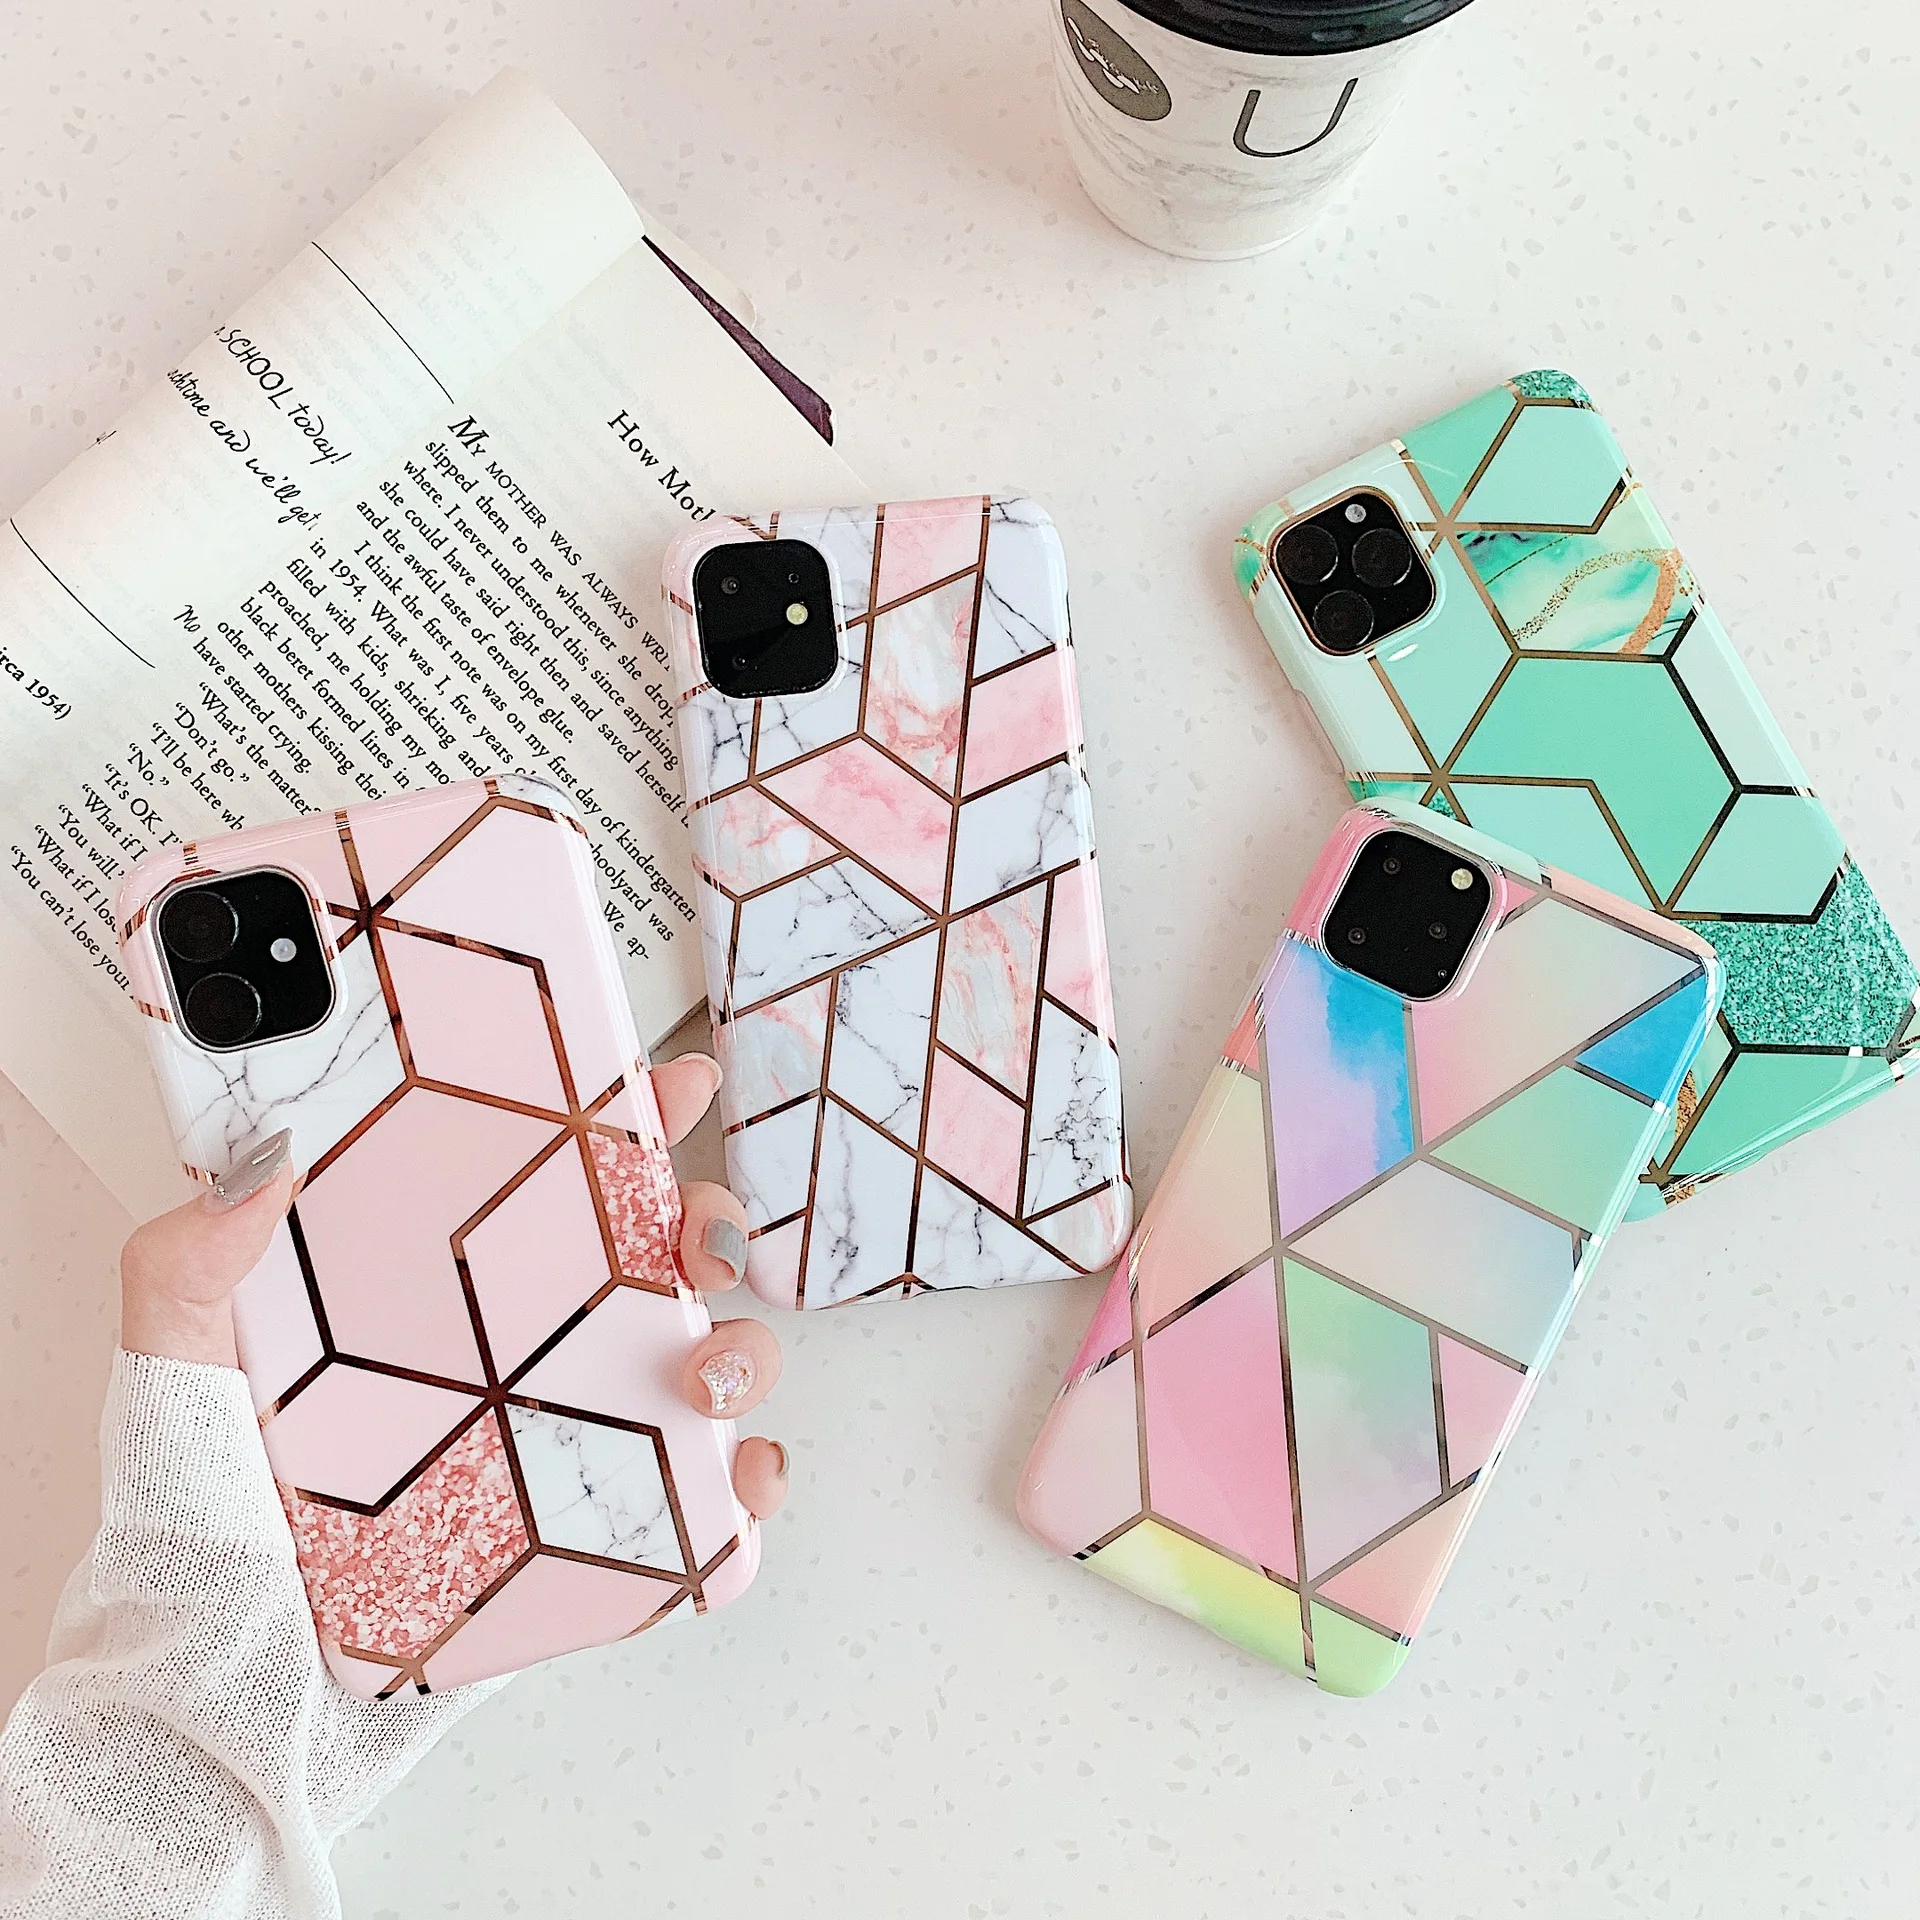 

Hot Sell Fashion Marble Silicone Mobile phone Cove For iPhone 7 8 11 12 13 Pro Max Xs Max Girls Case, As picture shows